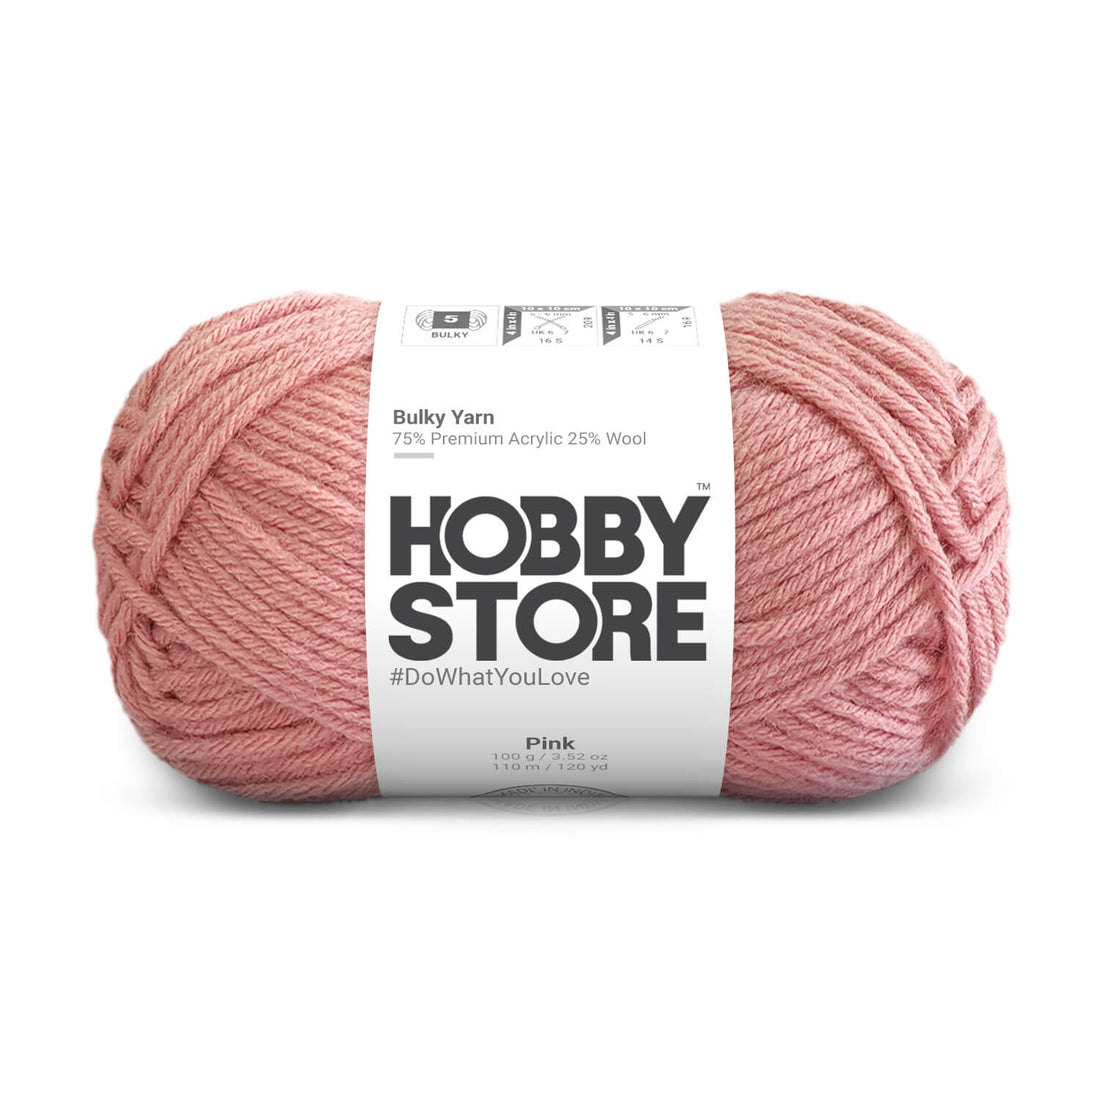 Bulky Yarn by Hobby Store - Pink 6031